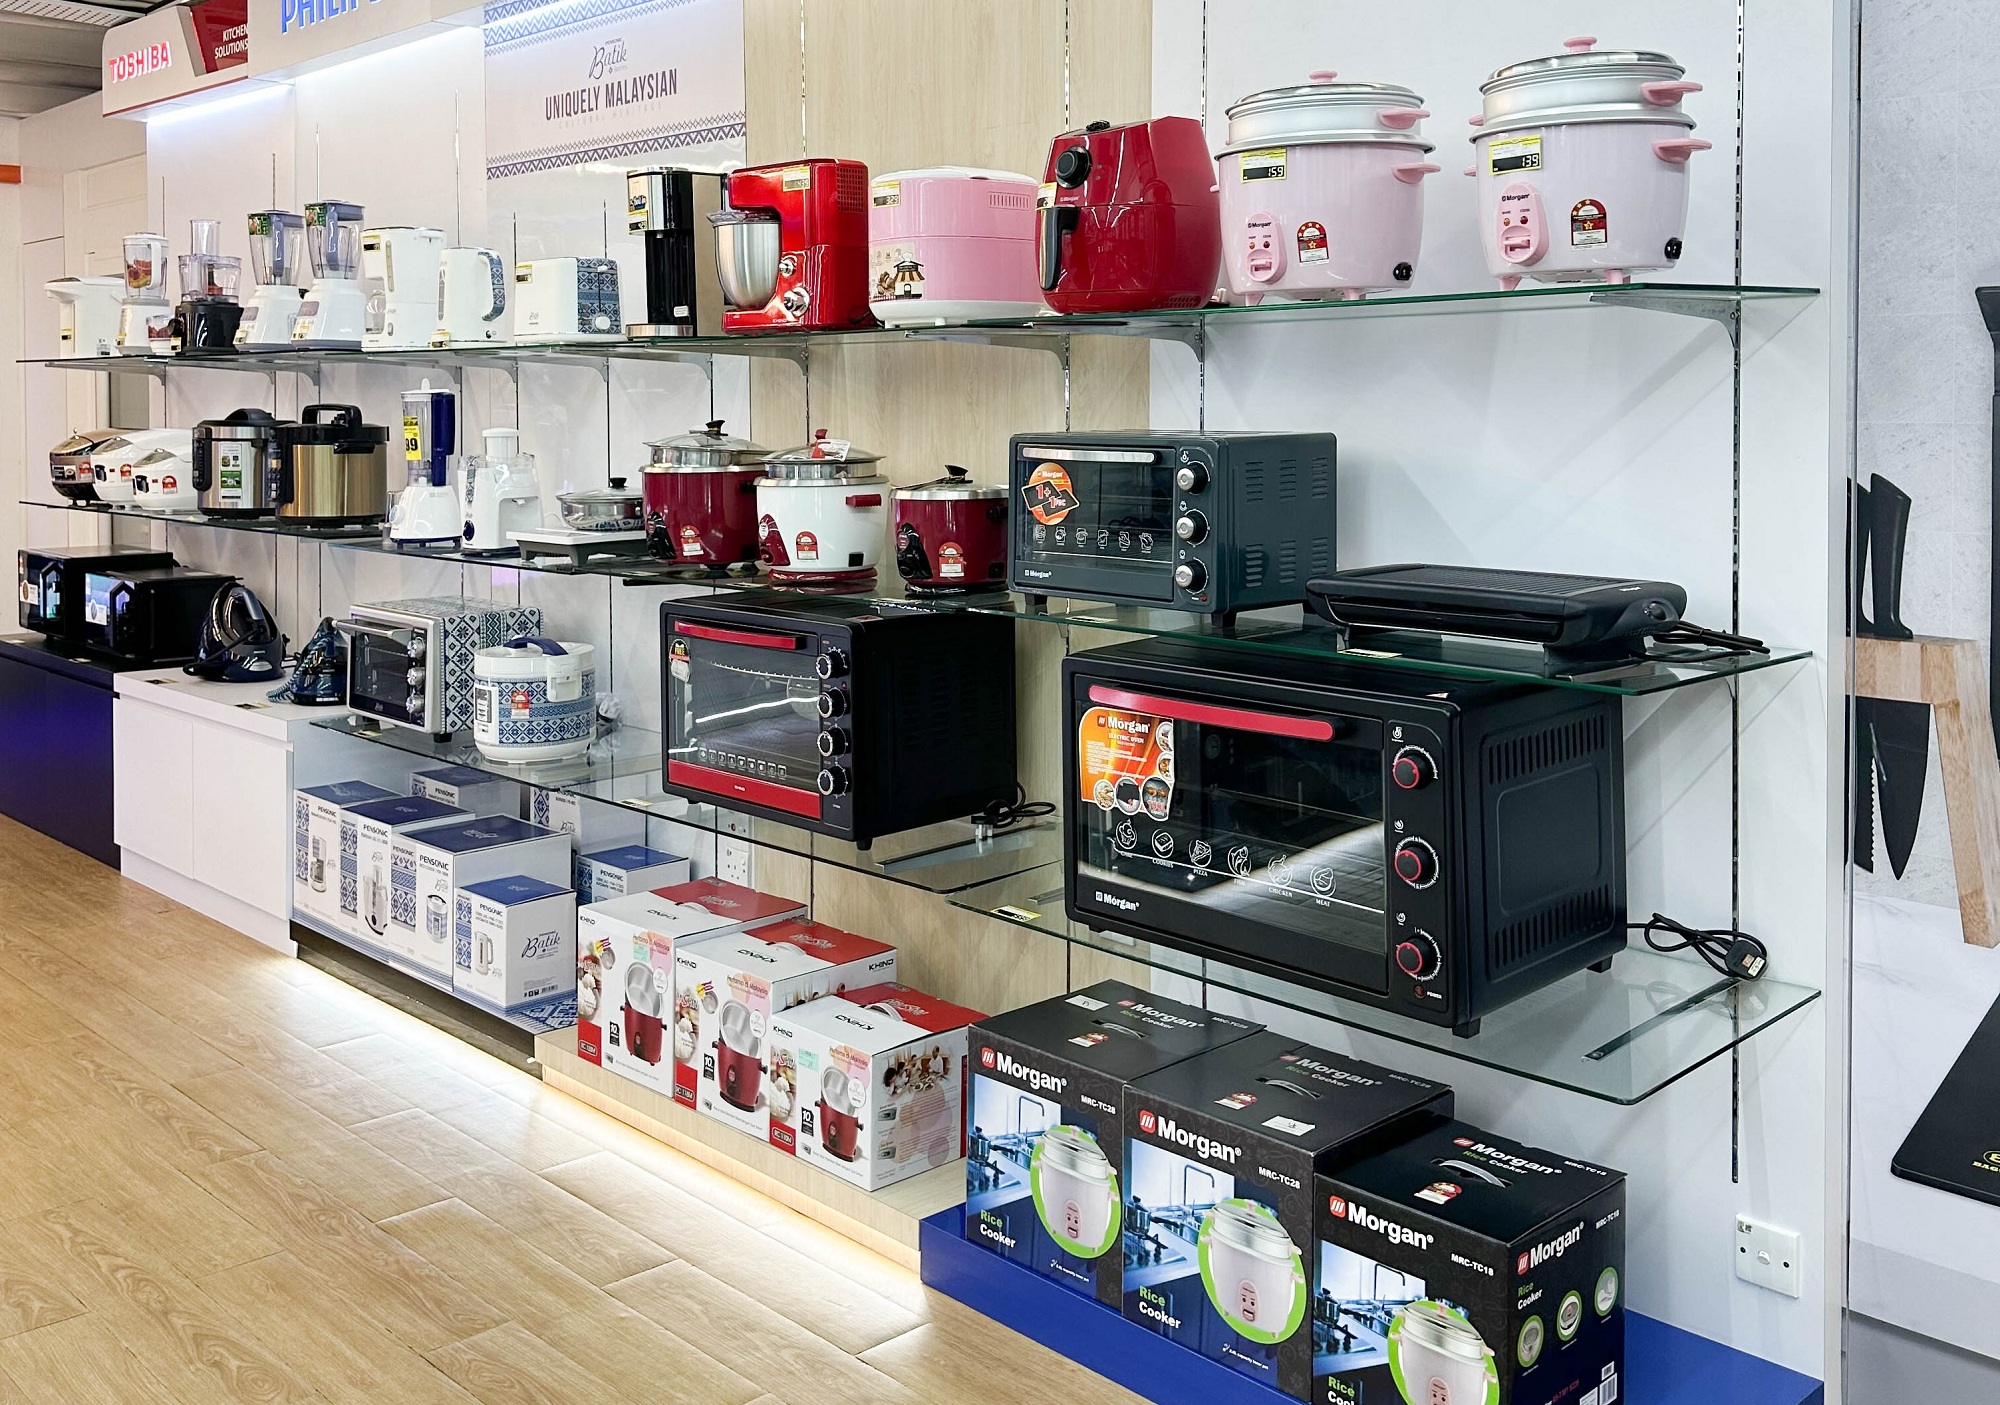 From small home appliances to small appliances such as blenders, hair dryers, rice cookers, etc., there is a dazzling array.